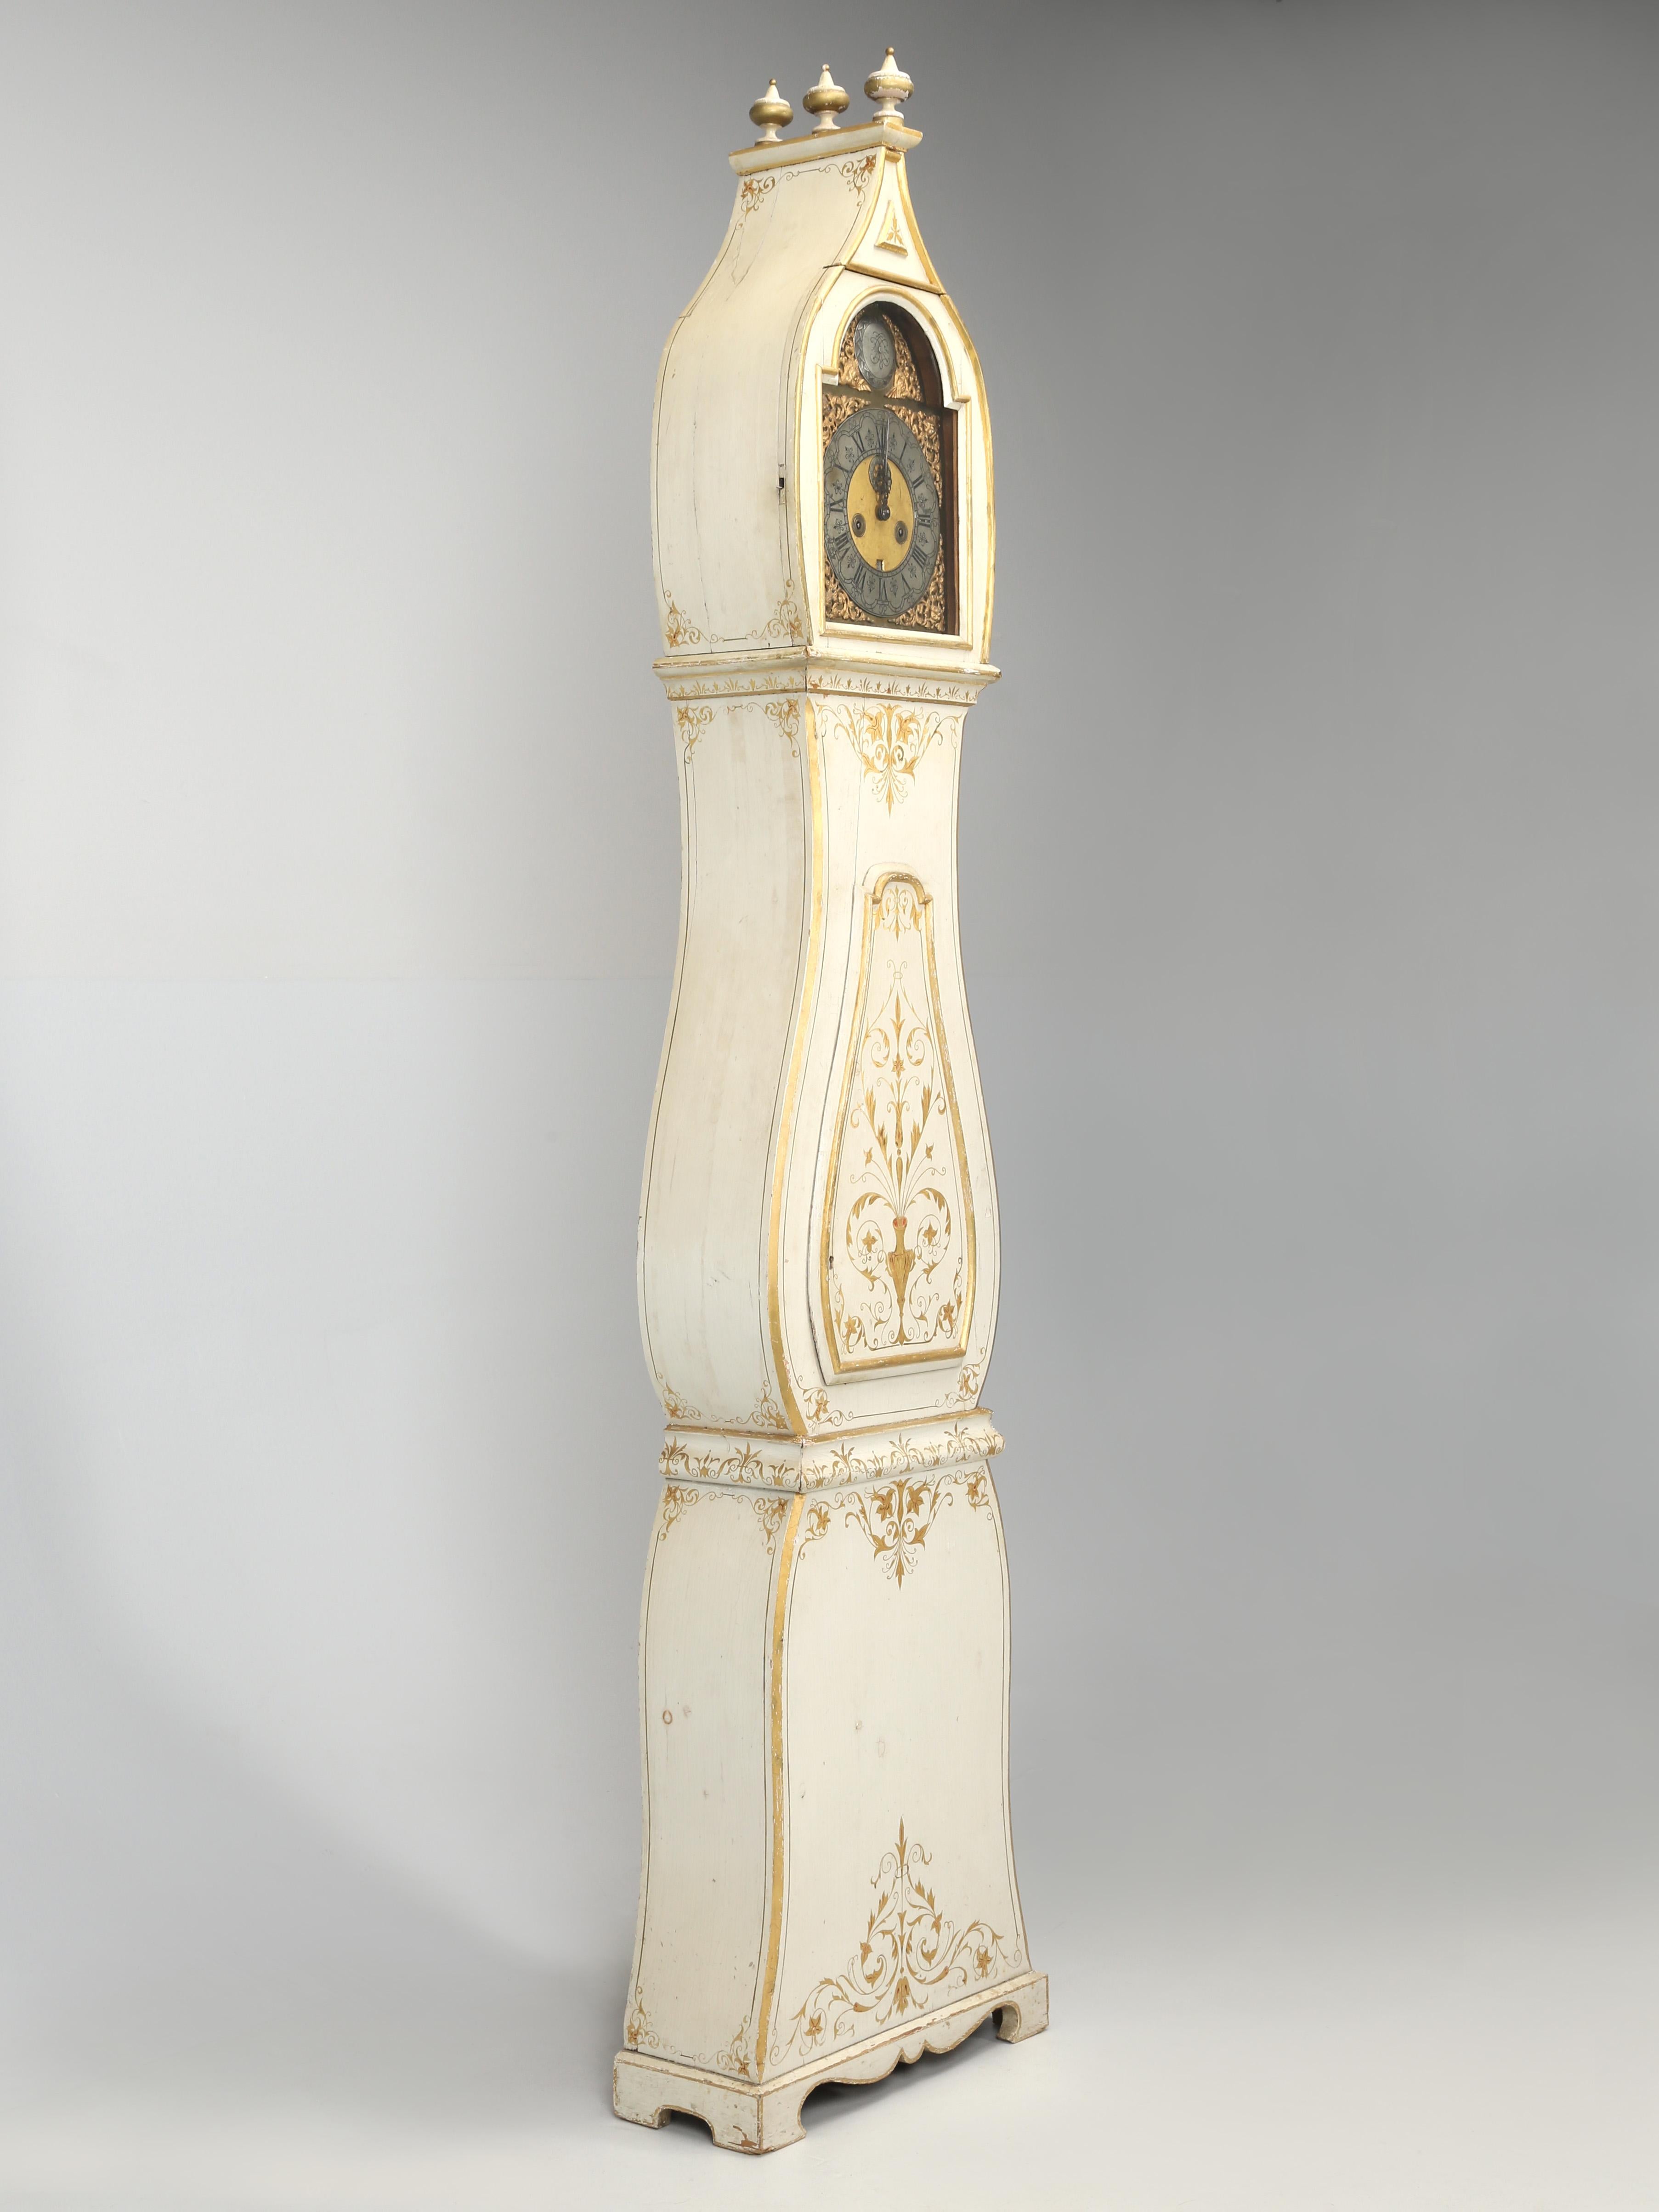 Spectacular antique Gustavian style Swedish grandfather clock, tall case clock, or more commonly referred to as a Mora clock. They were made during the late 1700’s to the mid-1800’s and they just have a certain look about them. Kind of hard to put